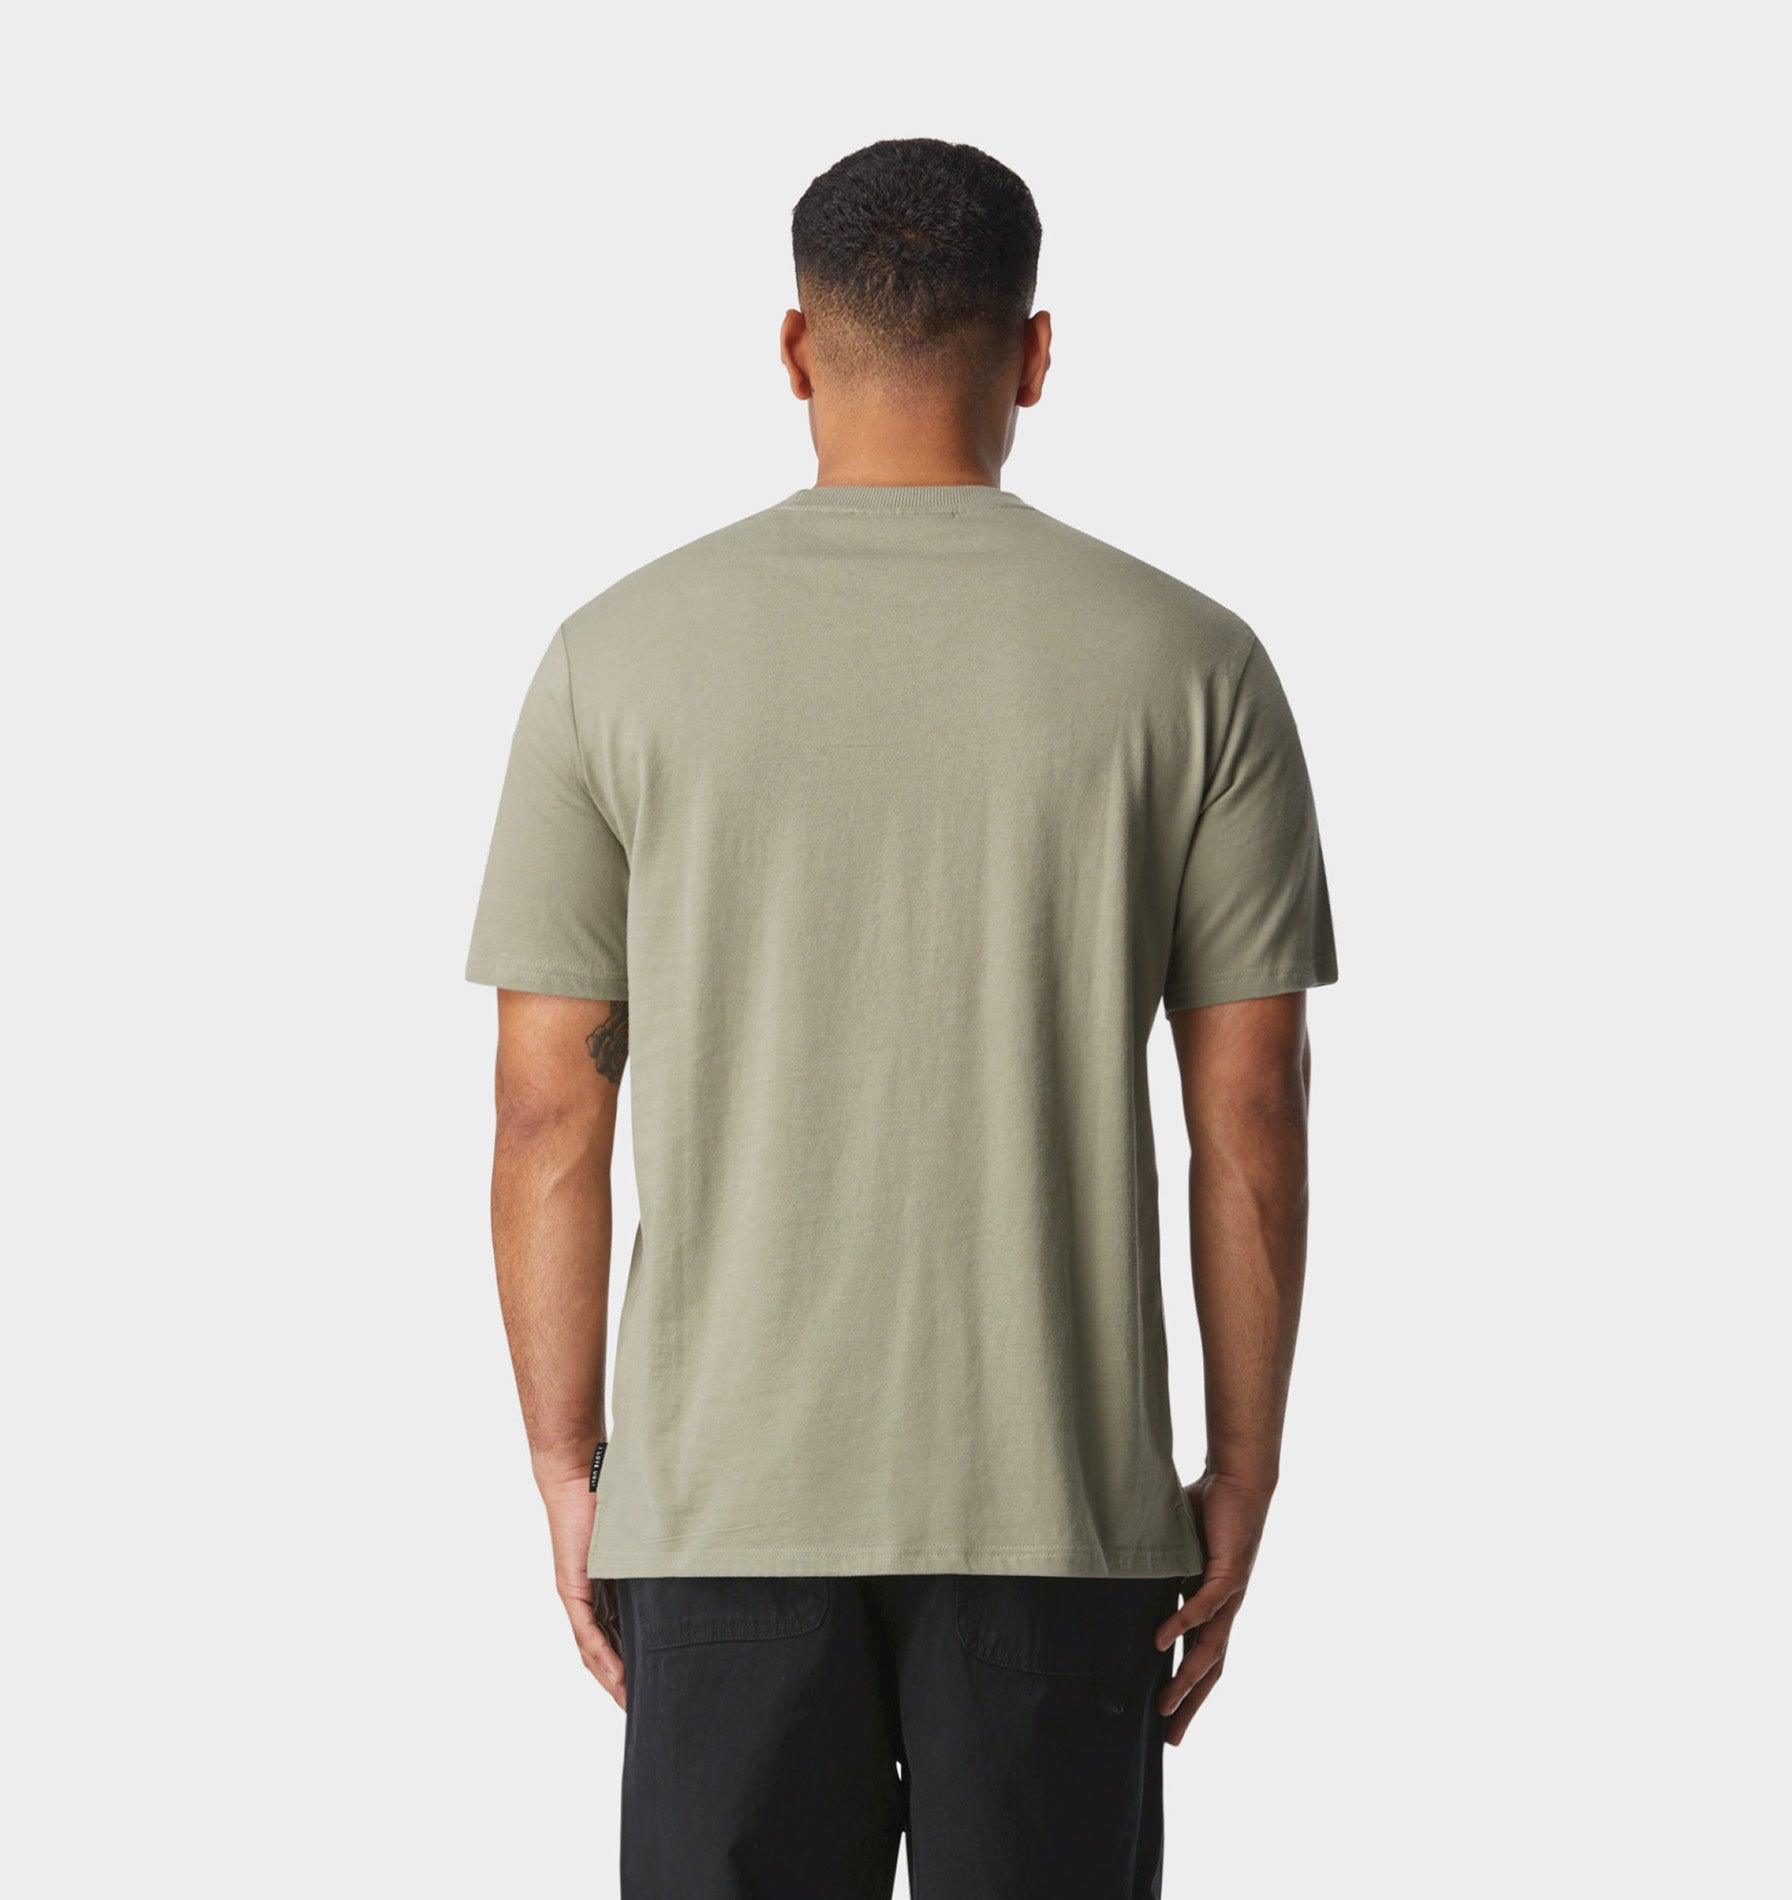 Eyes Wide Chester Tee - Moss Grey